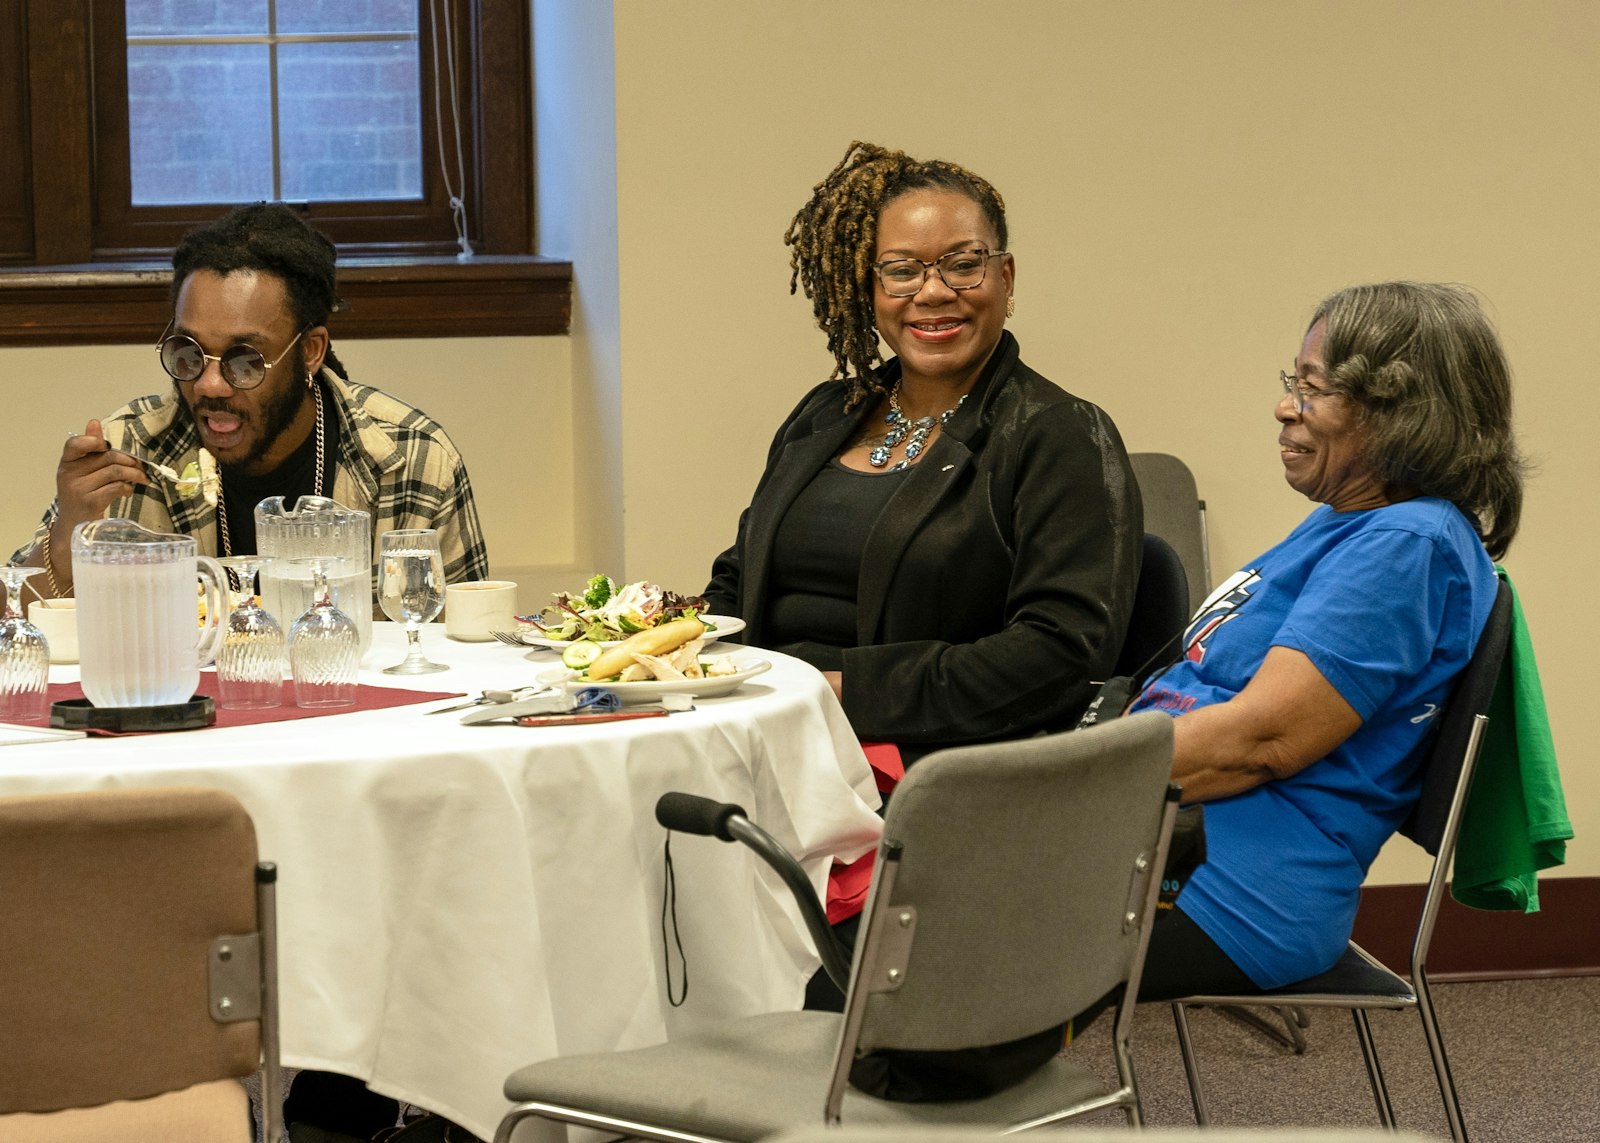 The meeting, which took place May 8 at Sacred Heart Major Seminary, was the first of several meant to localize the national pastoral plan and implement a strategy for the Black Catholic community of southeast Michigan.